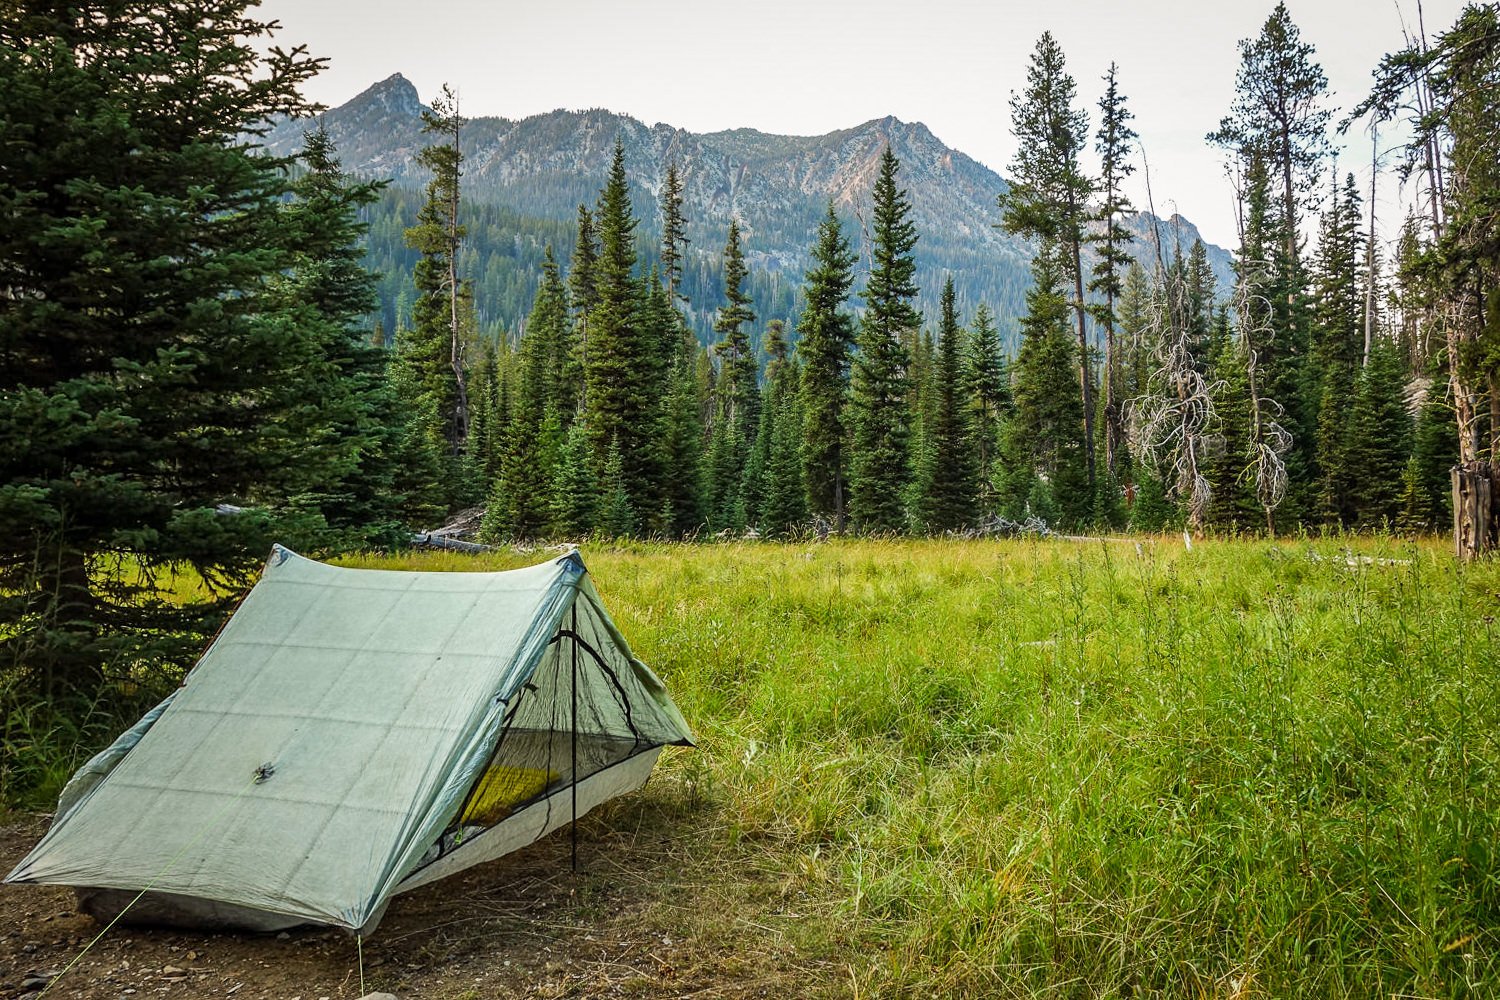 The Zpacks Duplex backpacking tent in a meadow in the Wallowa Mountains.